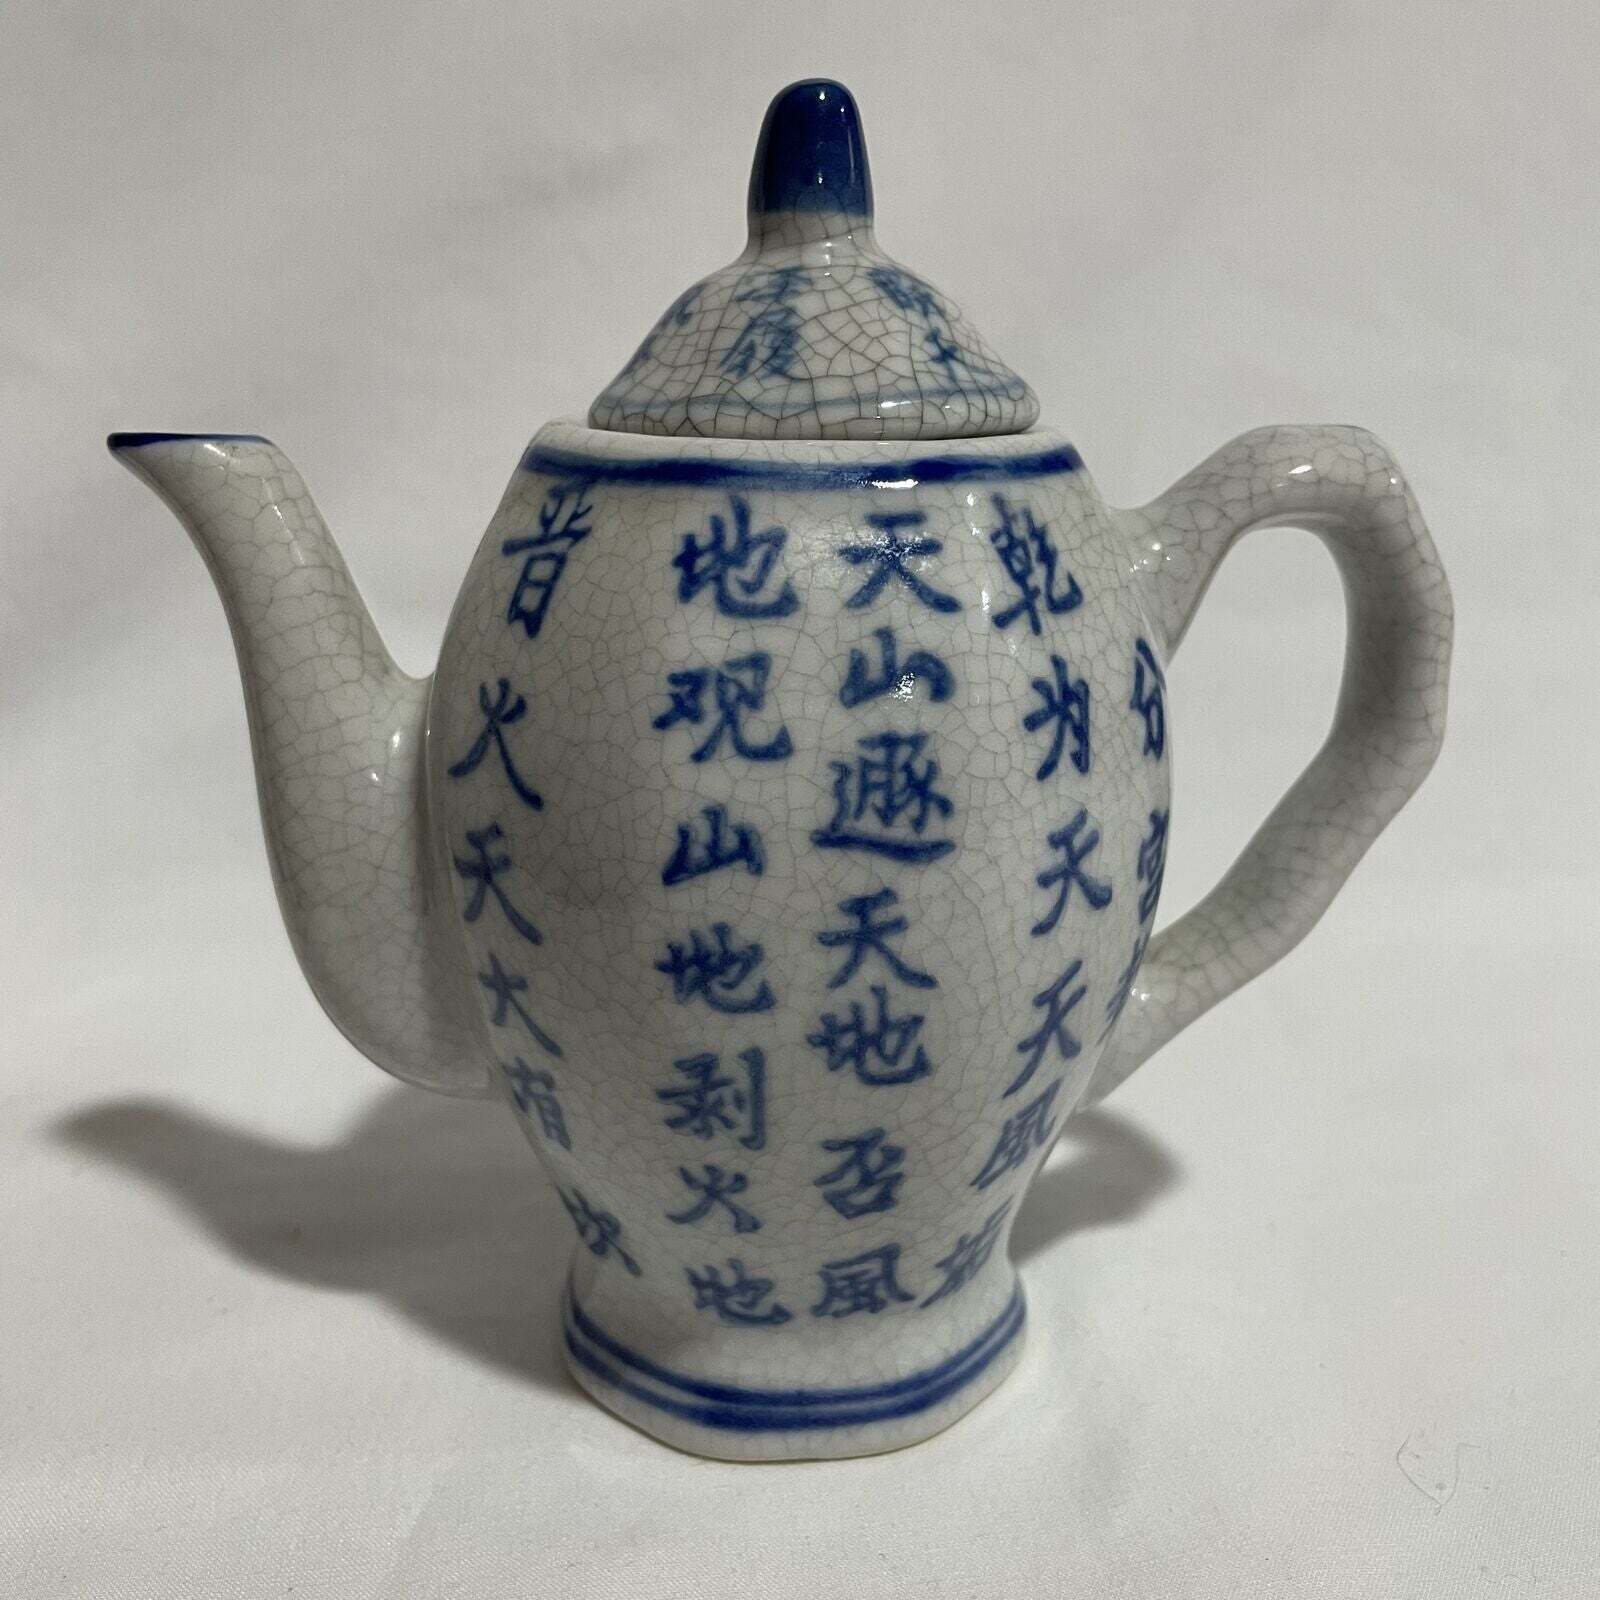 Vintage Mini Ceramic Blue and White Teapot w/ Lid and Chinese Writing